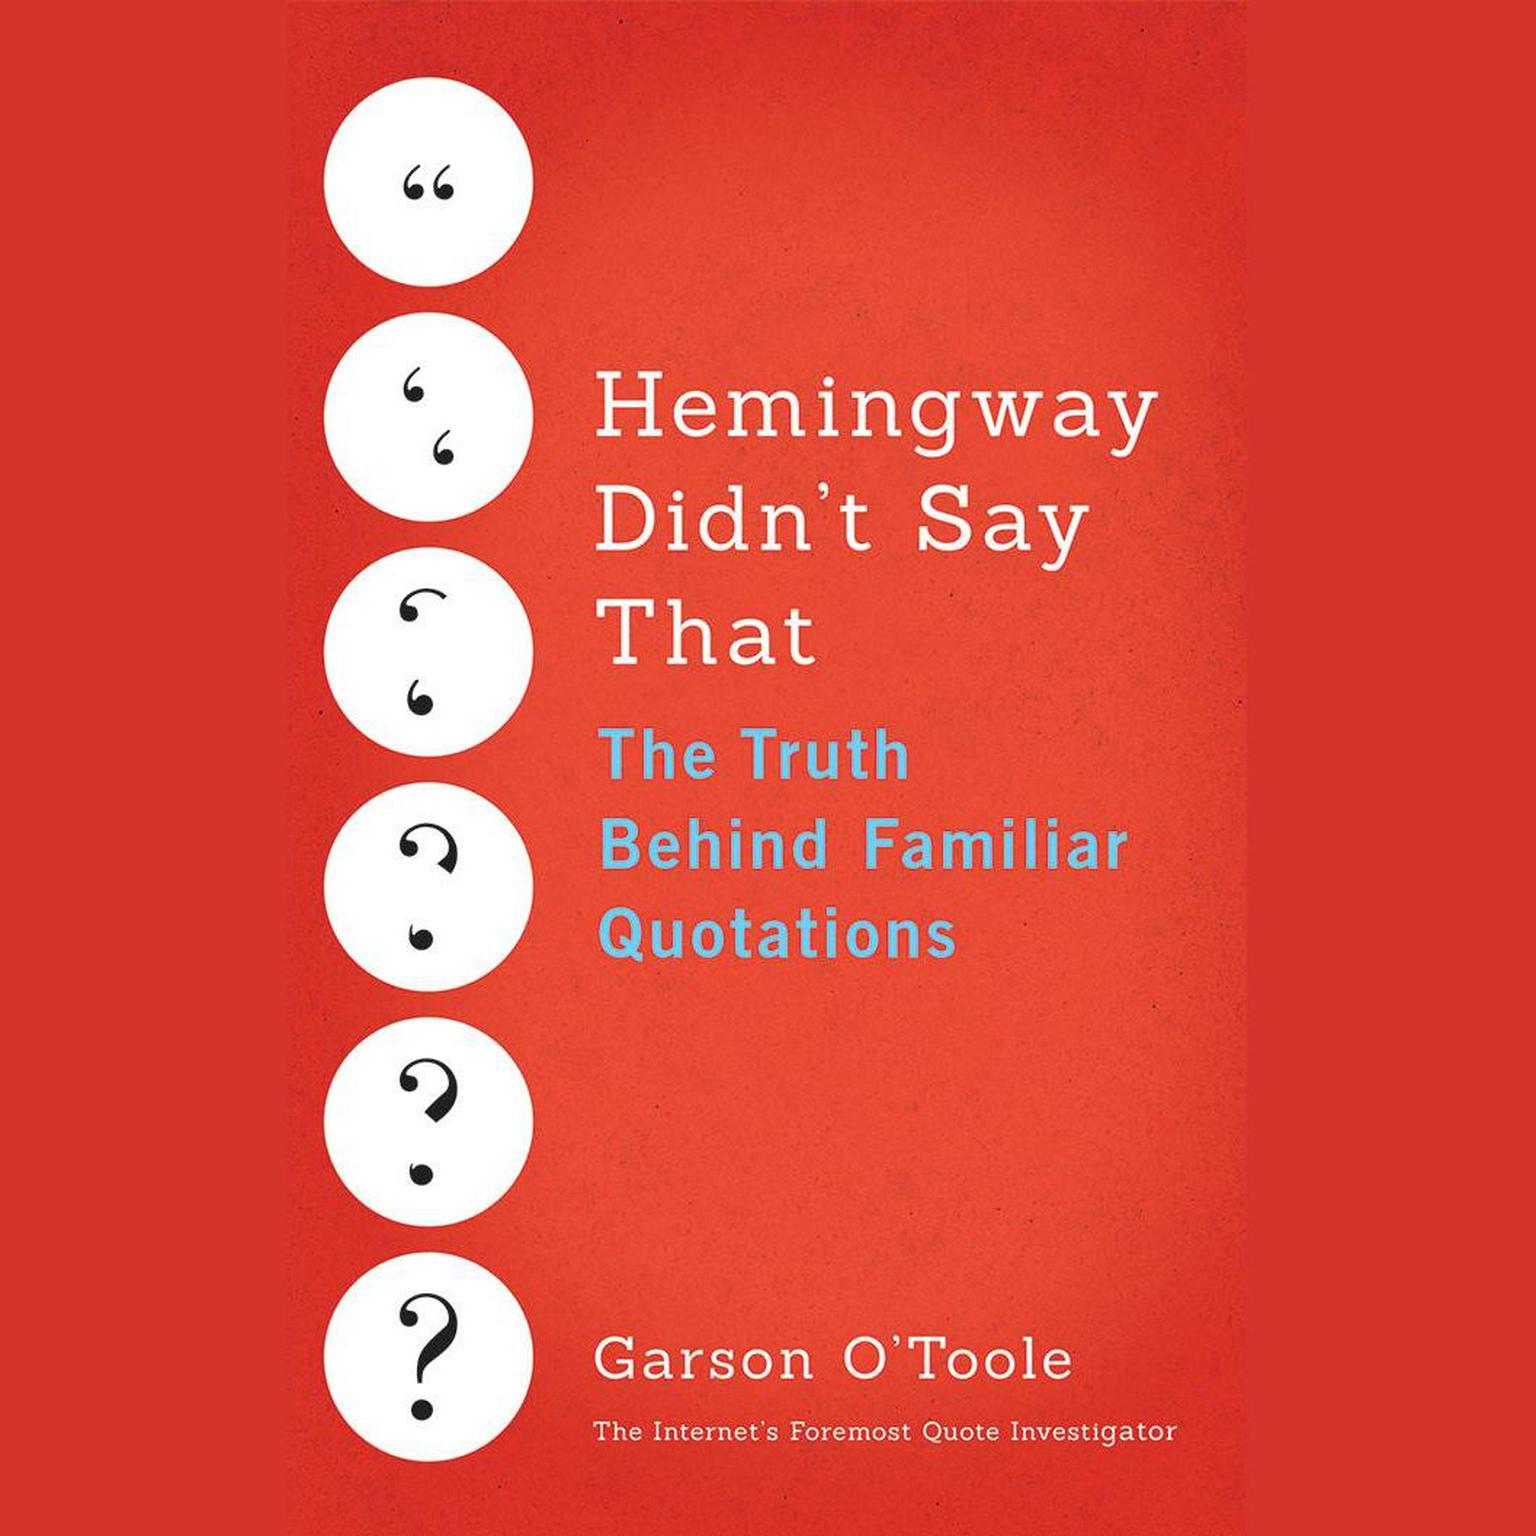 Hemingway Didnt Say That: The Truth Behind Familiar Quotations Audiobook, by Garson O'Toole